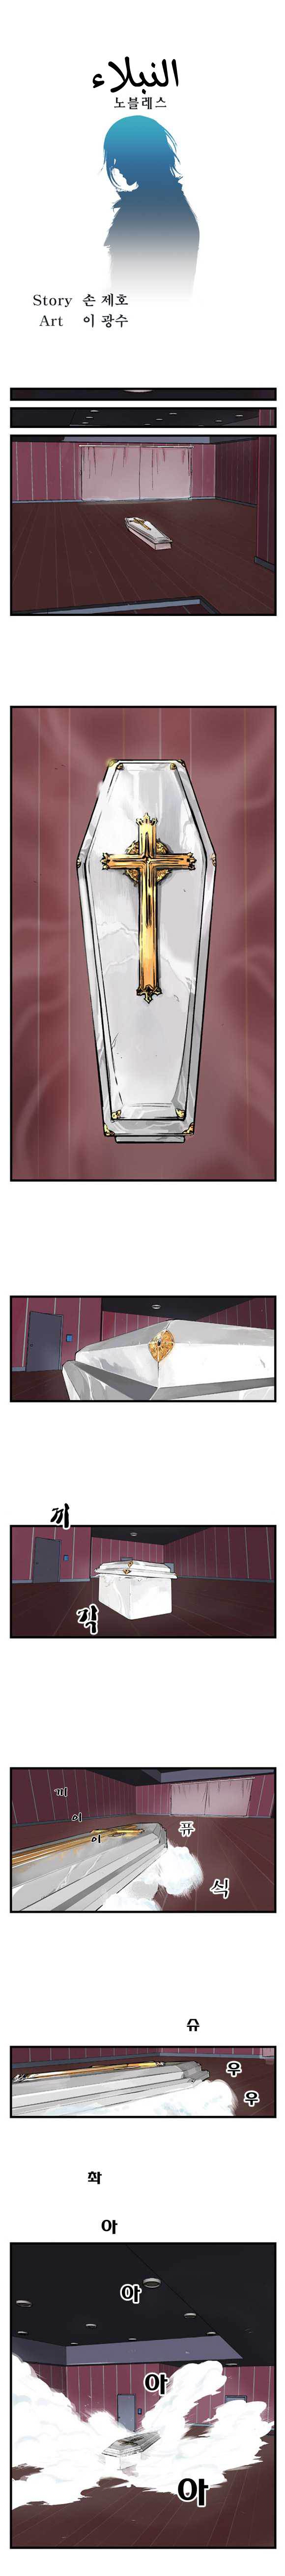 Noblesse: Chapter 01 - Page 1